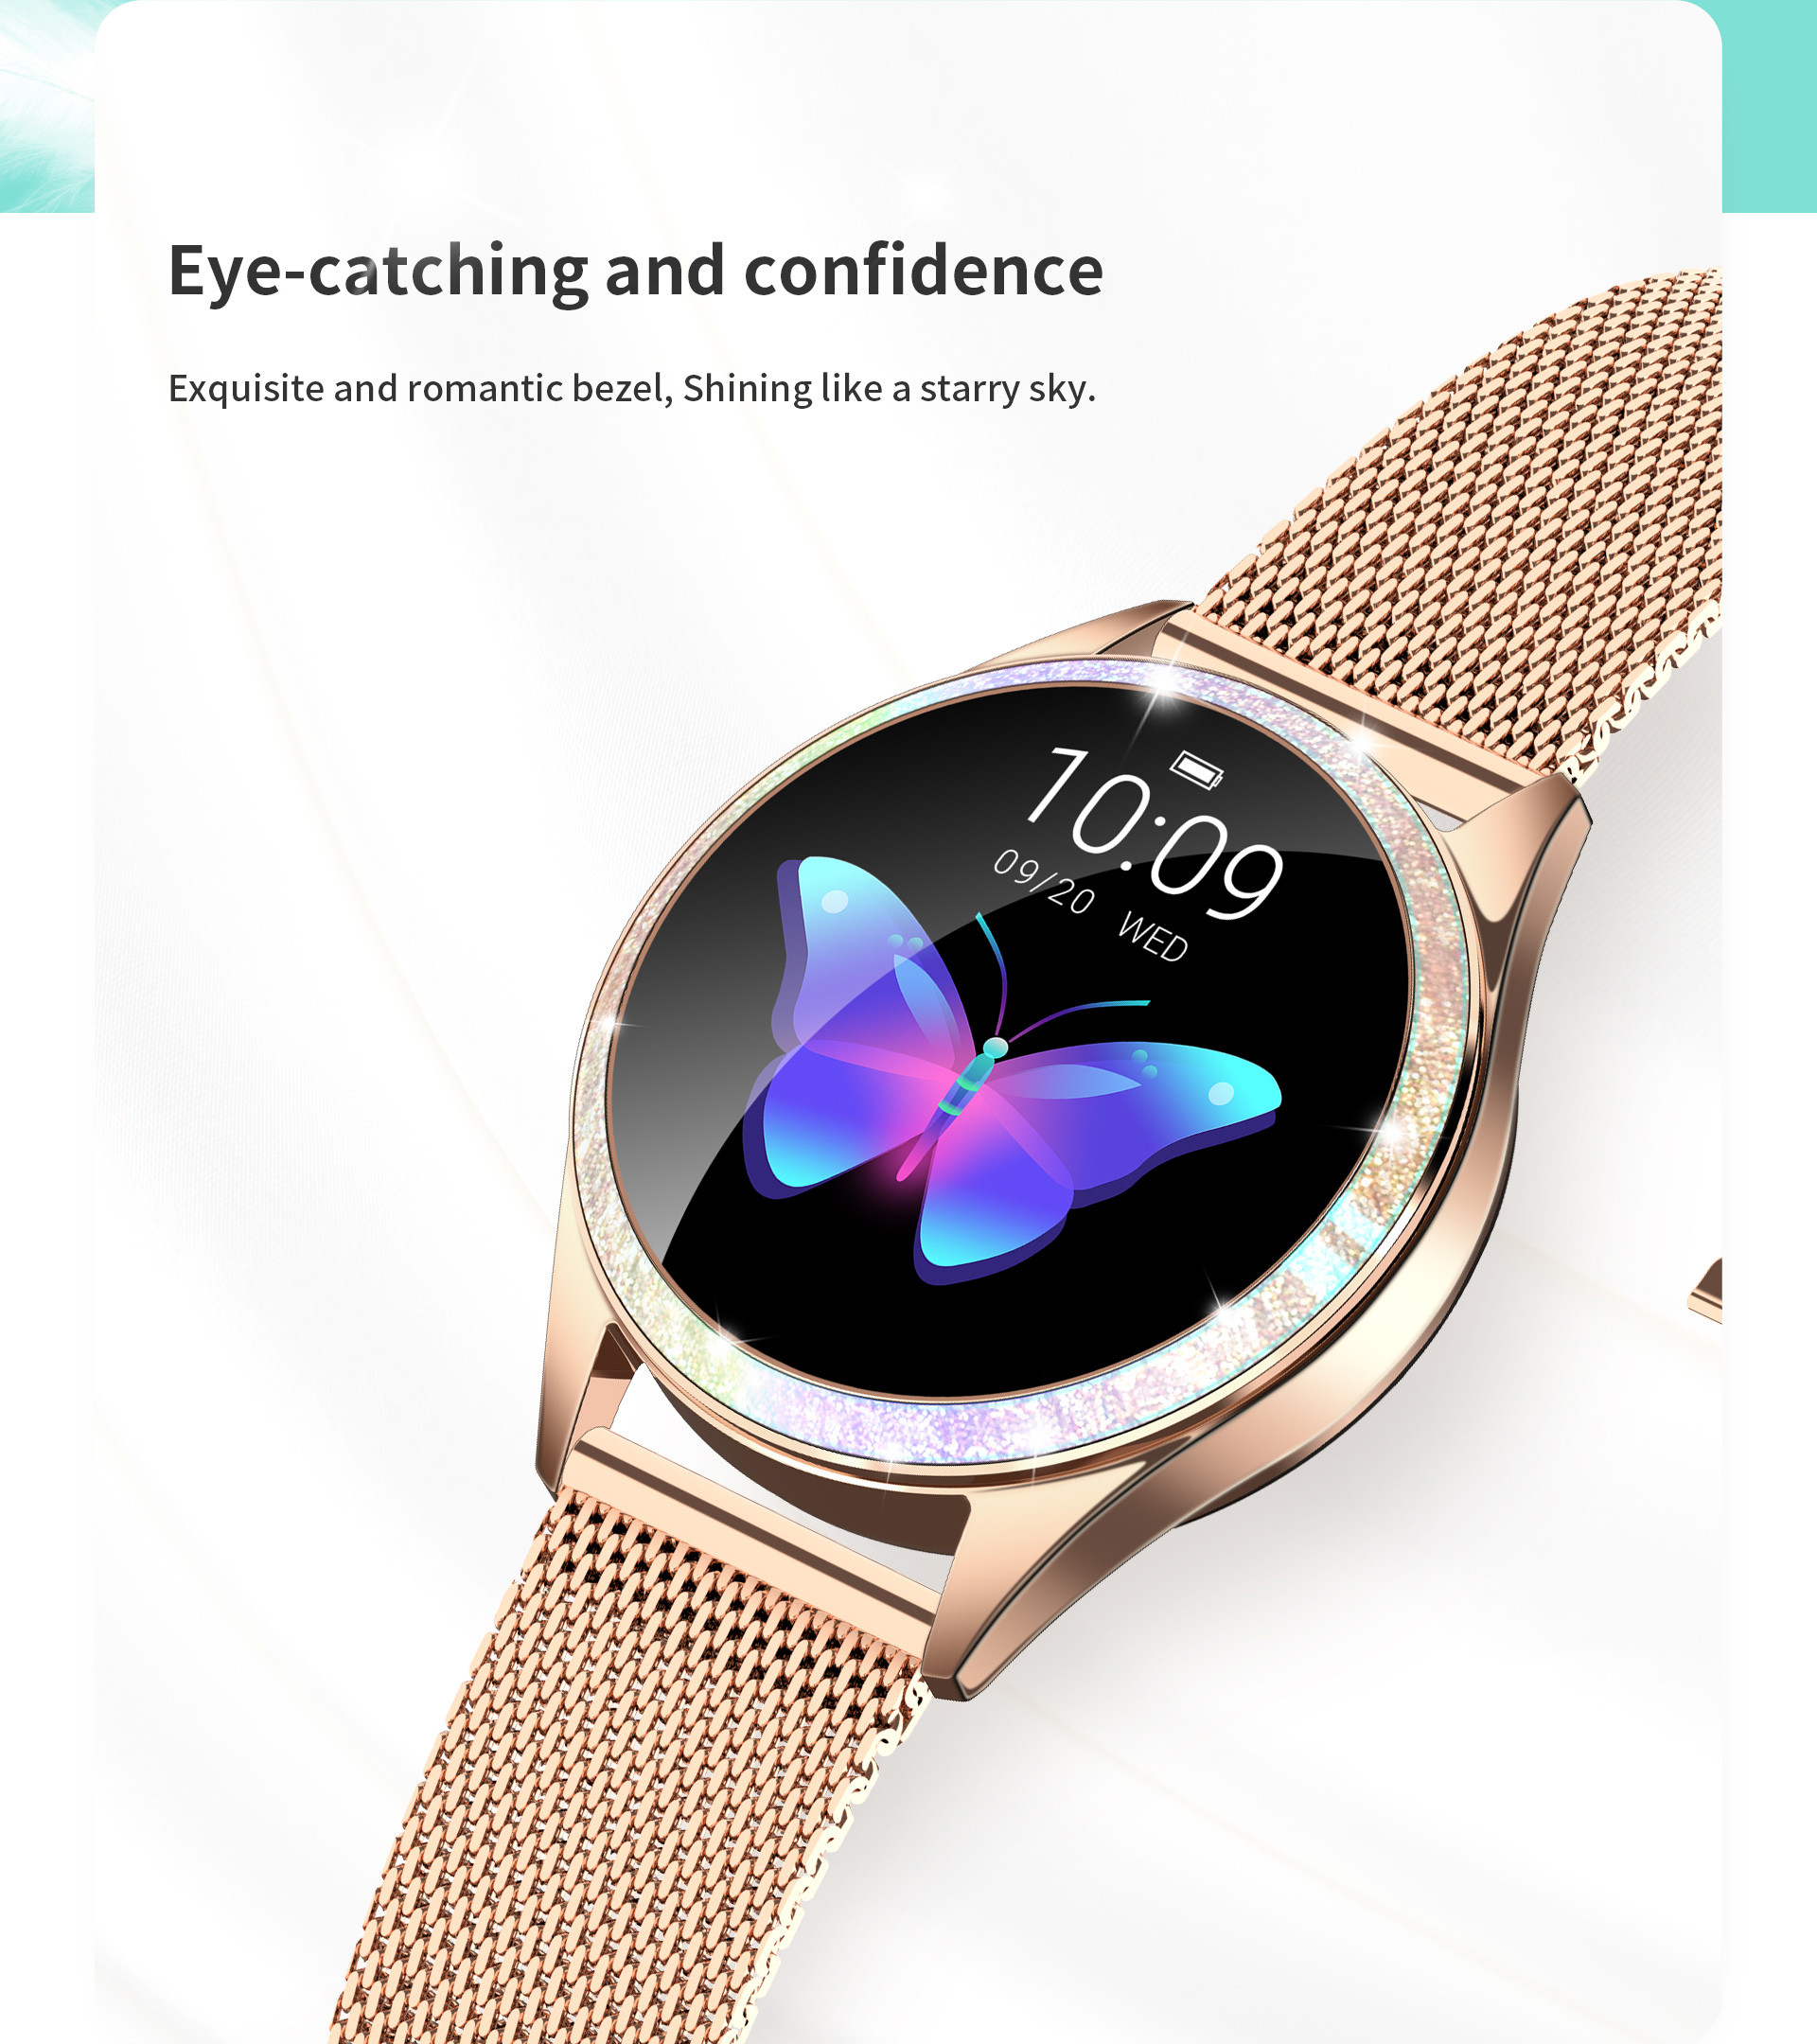 Round Lady Style NRF 52832 Heart Rate Monitor Smartwatch